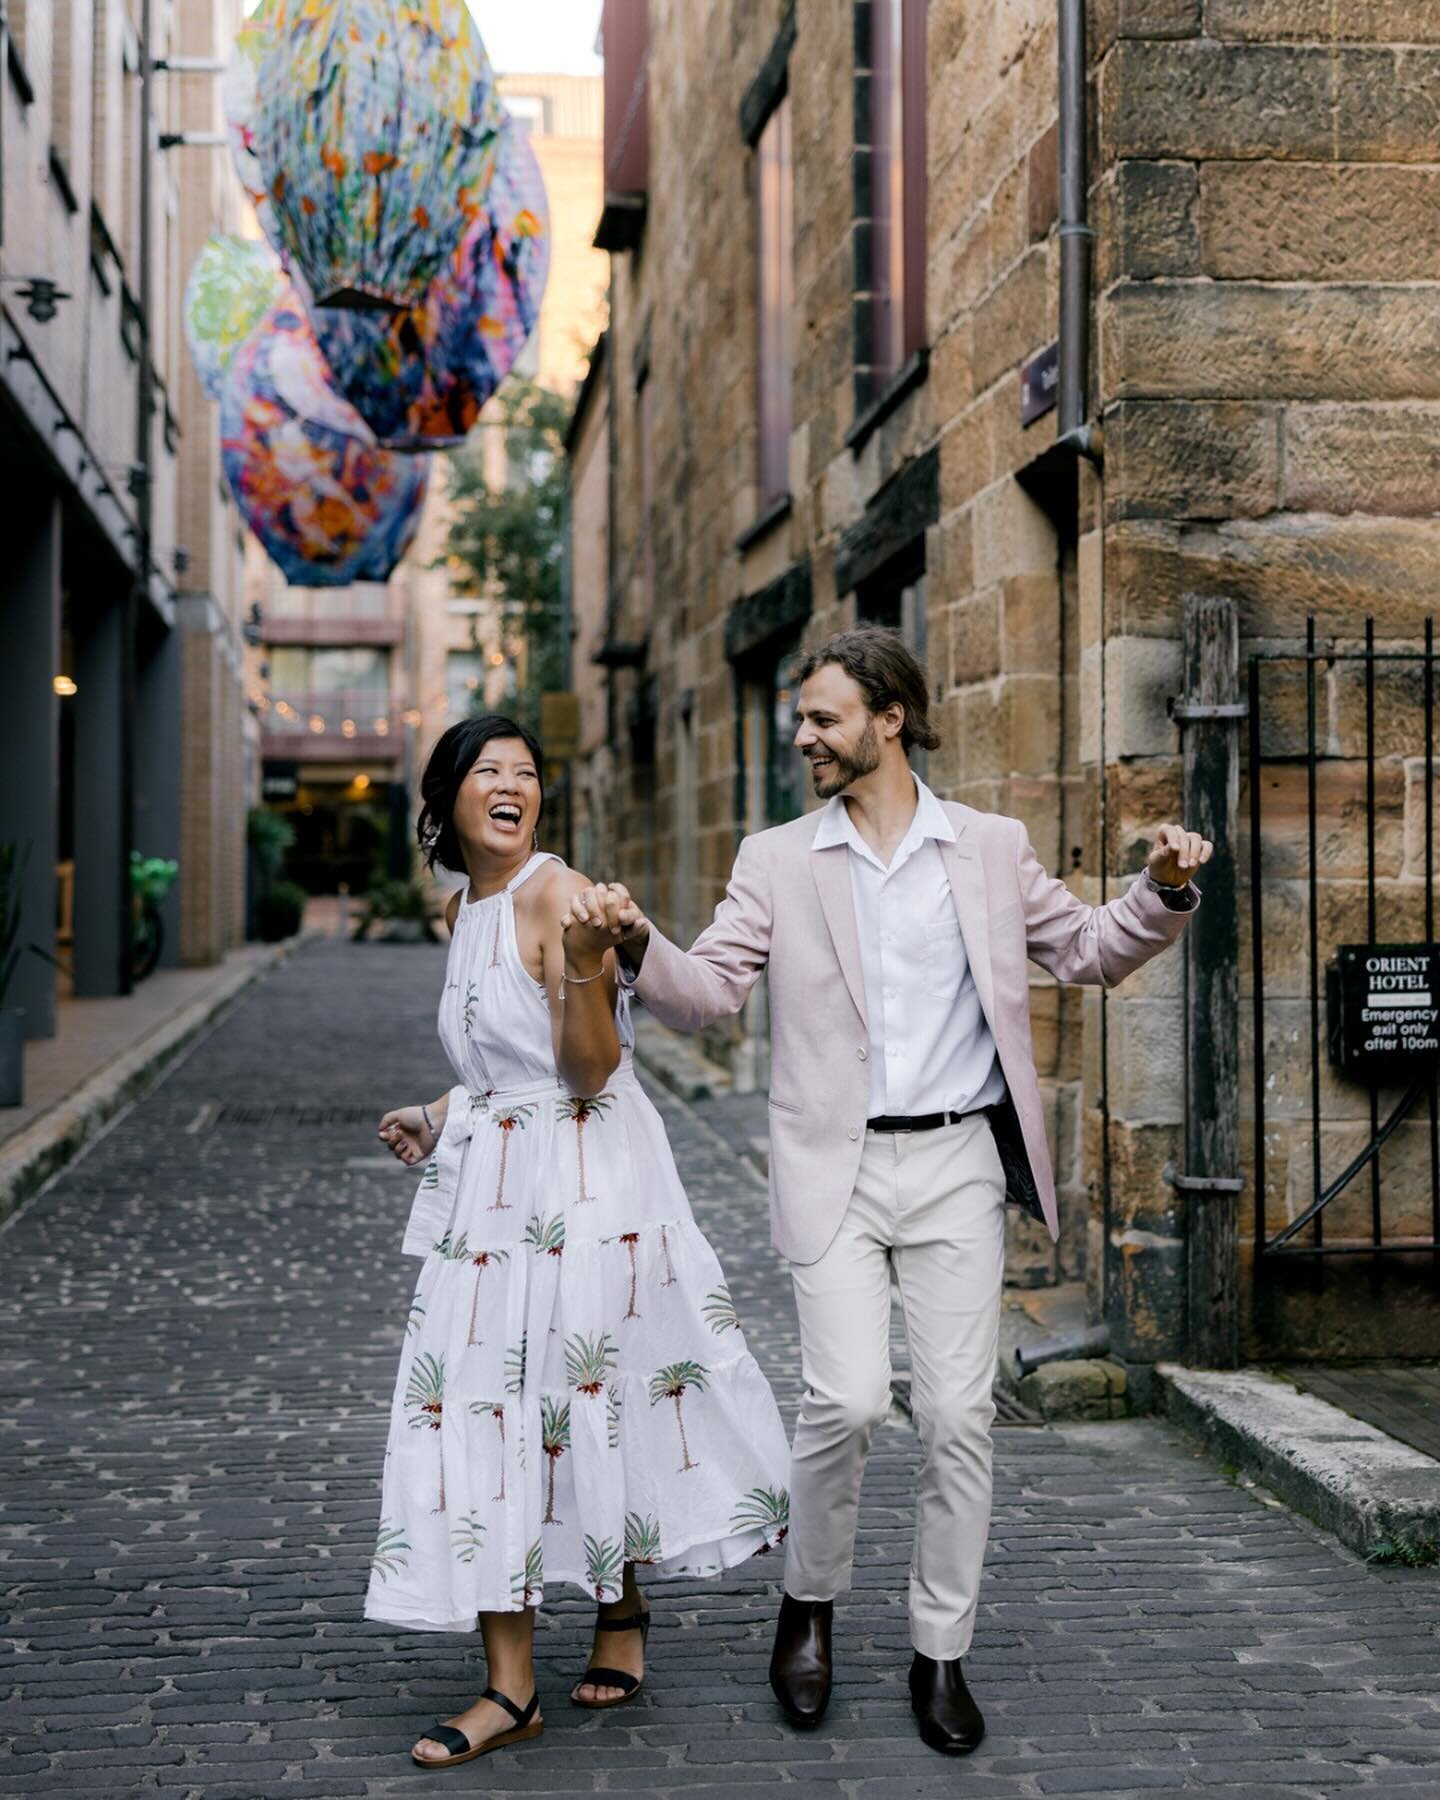 Just over a week ago these two cuties got married in the heart of the city. Their energy was infectious and we spent the afternoon dancing down the streets to Tenancious D and Flight of the Concords. To be honest, I&rsquo;m not sure who had more fun 